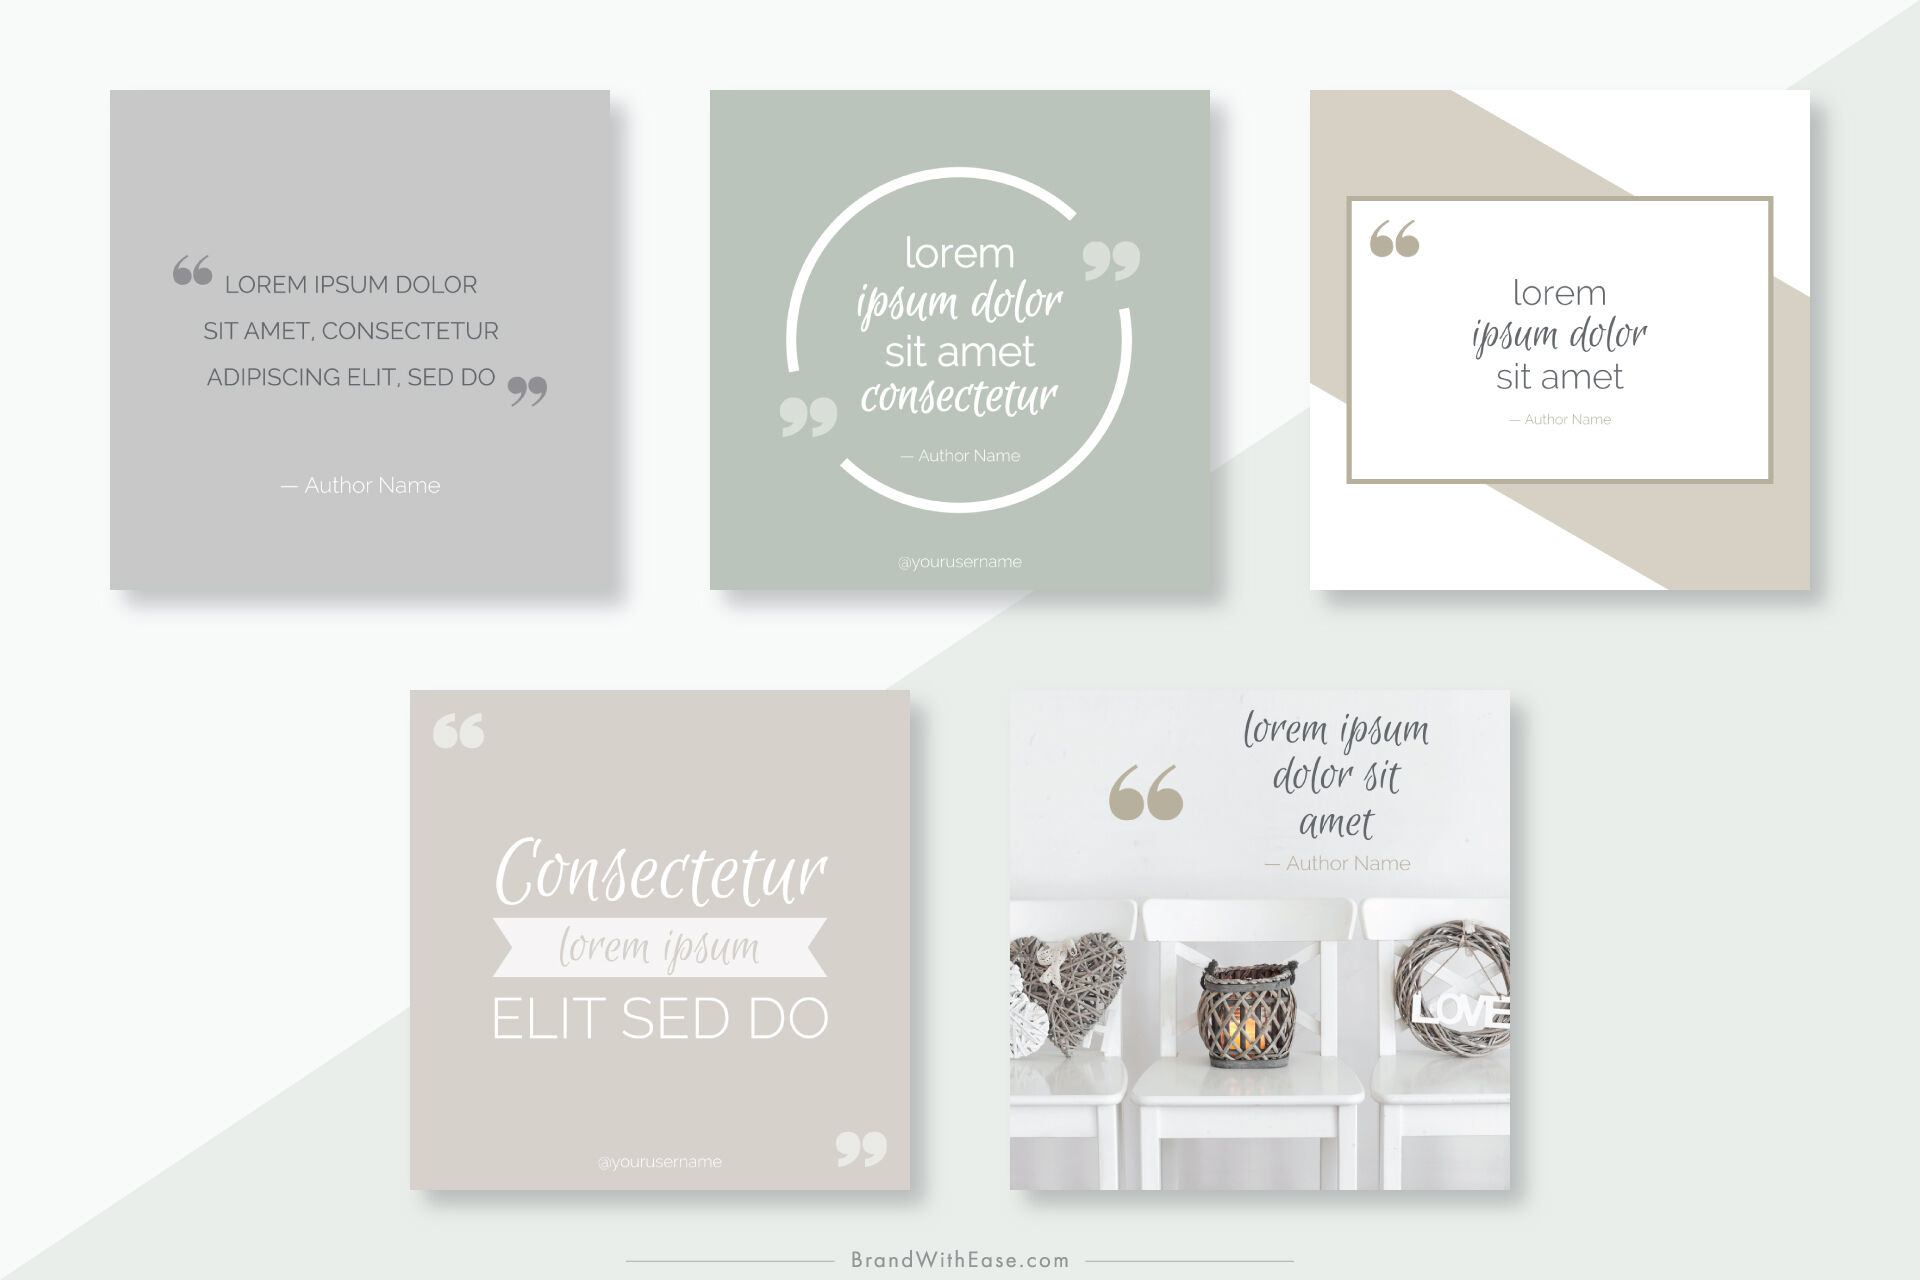 Instagram Neutral Quote Pack For Canva By Brand With Ease Thehungryjpeg Com